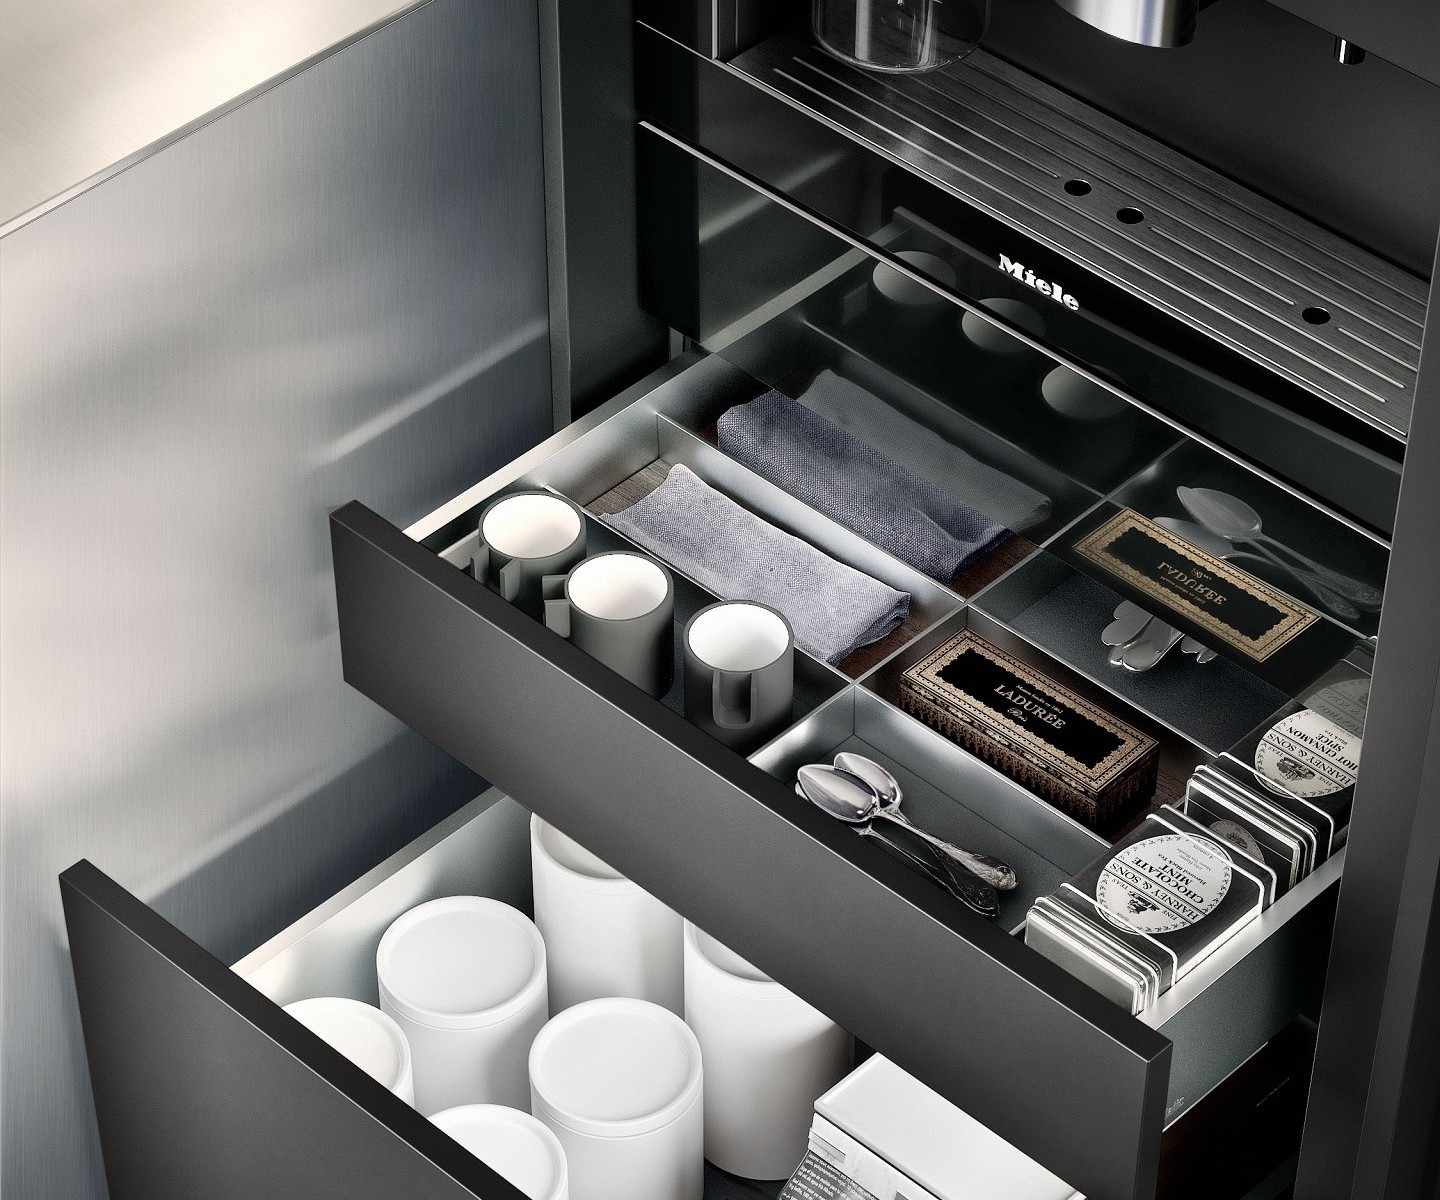 Porcelain containers and cutlery inserts from the SieMatic Aluminum Interior Accessories System for kitchen drawers